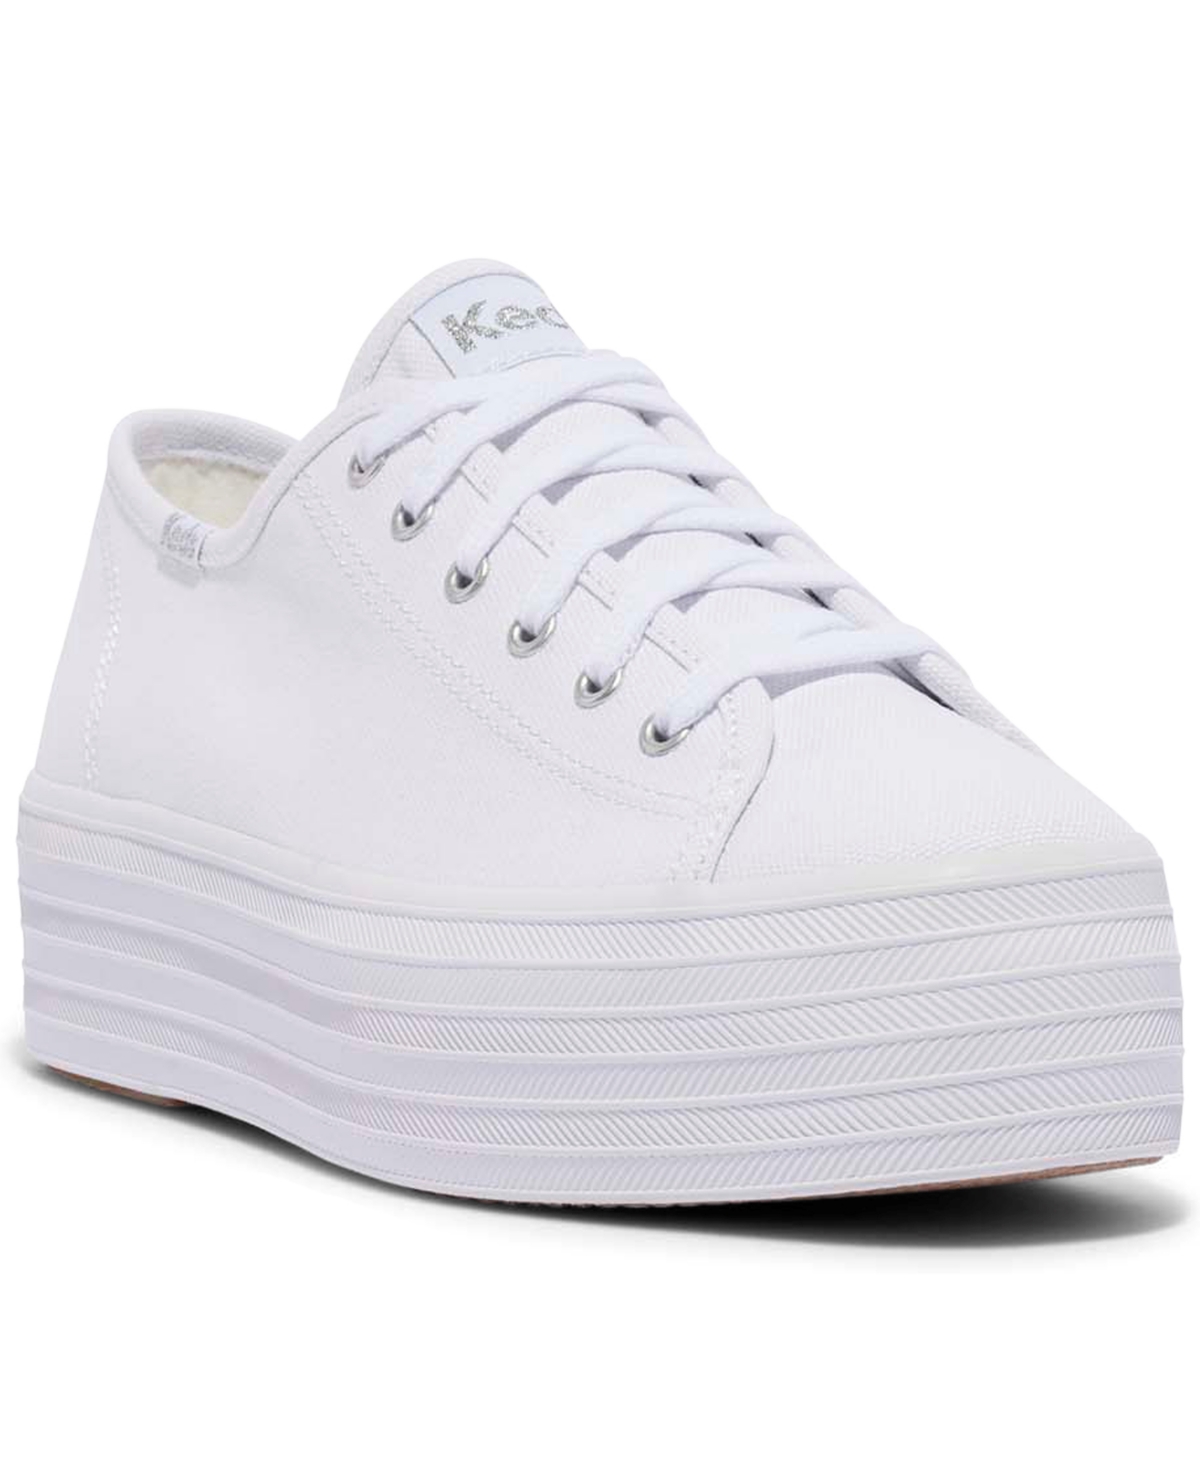 Women's Triple Up Canvas Platform Casual Sneakers from Finish Line - White